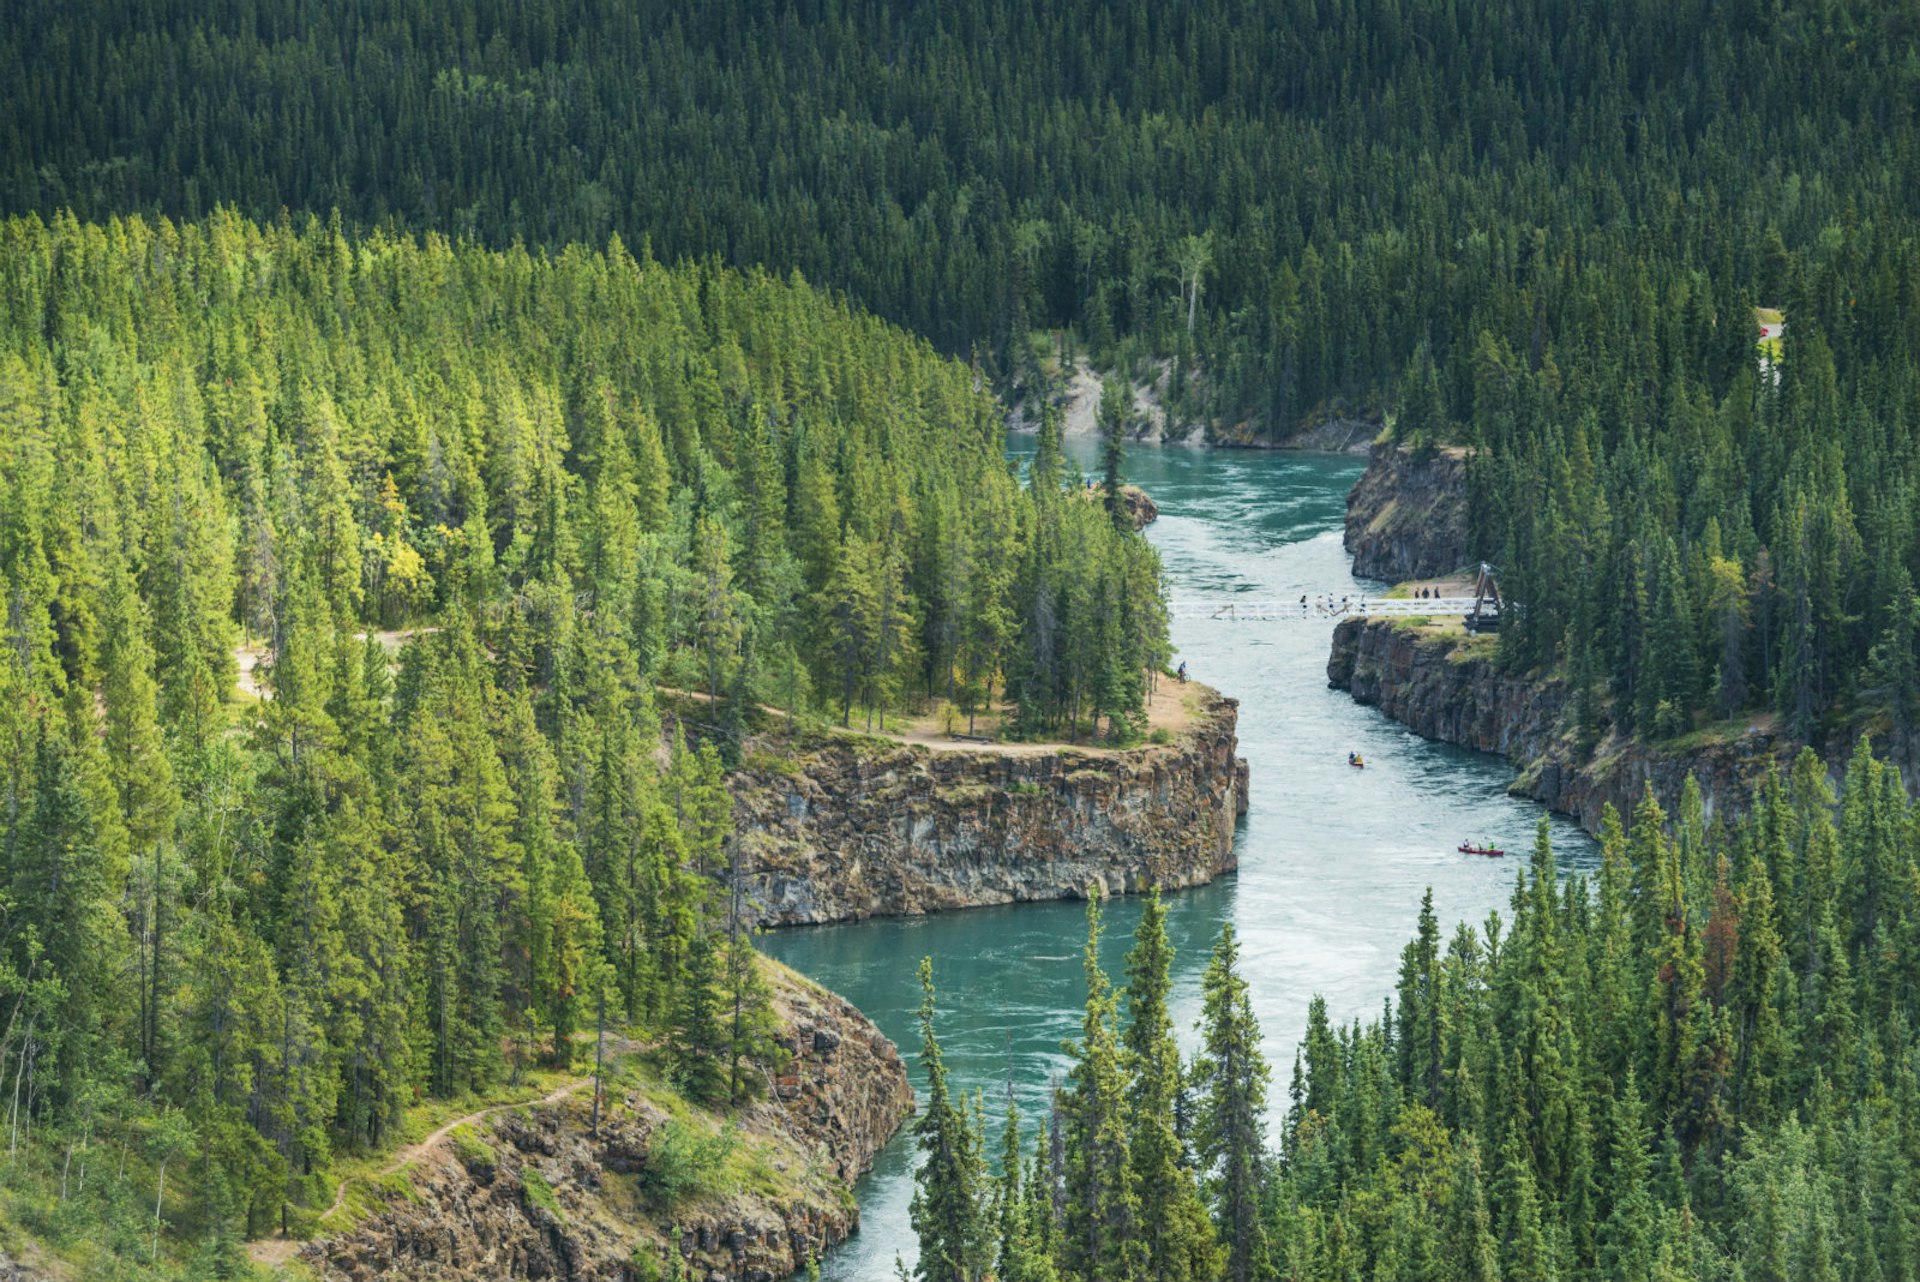 Miles Canyon, just outside Whitehorse, was just one of the tricky passes Gold Rush stampeders had to navigate by boat on their way to Klondike © Justin Foulkes / Lonely Planet